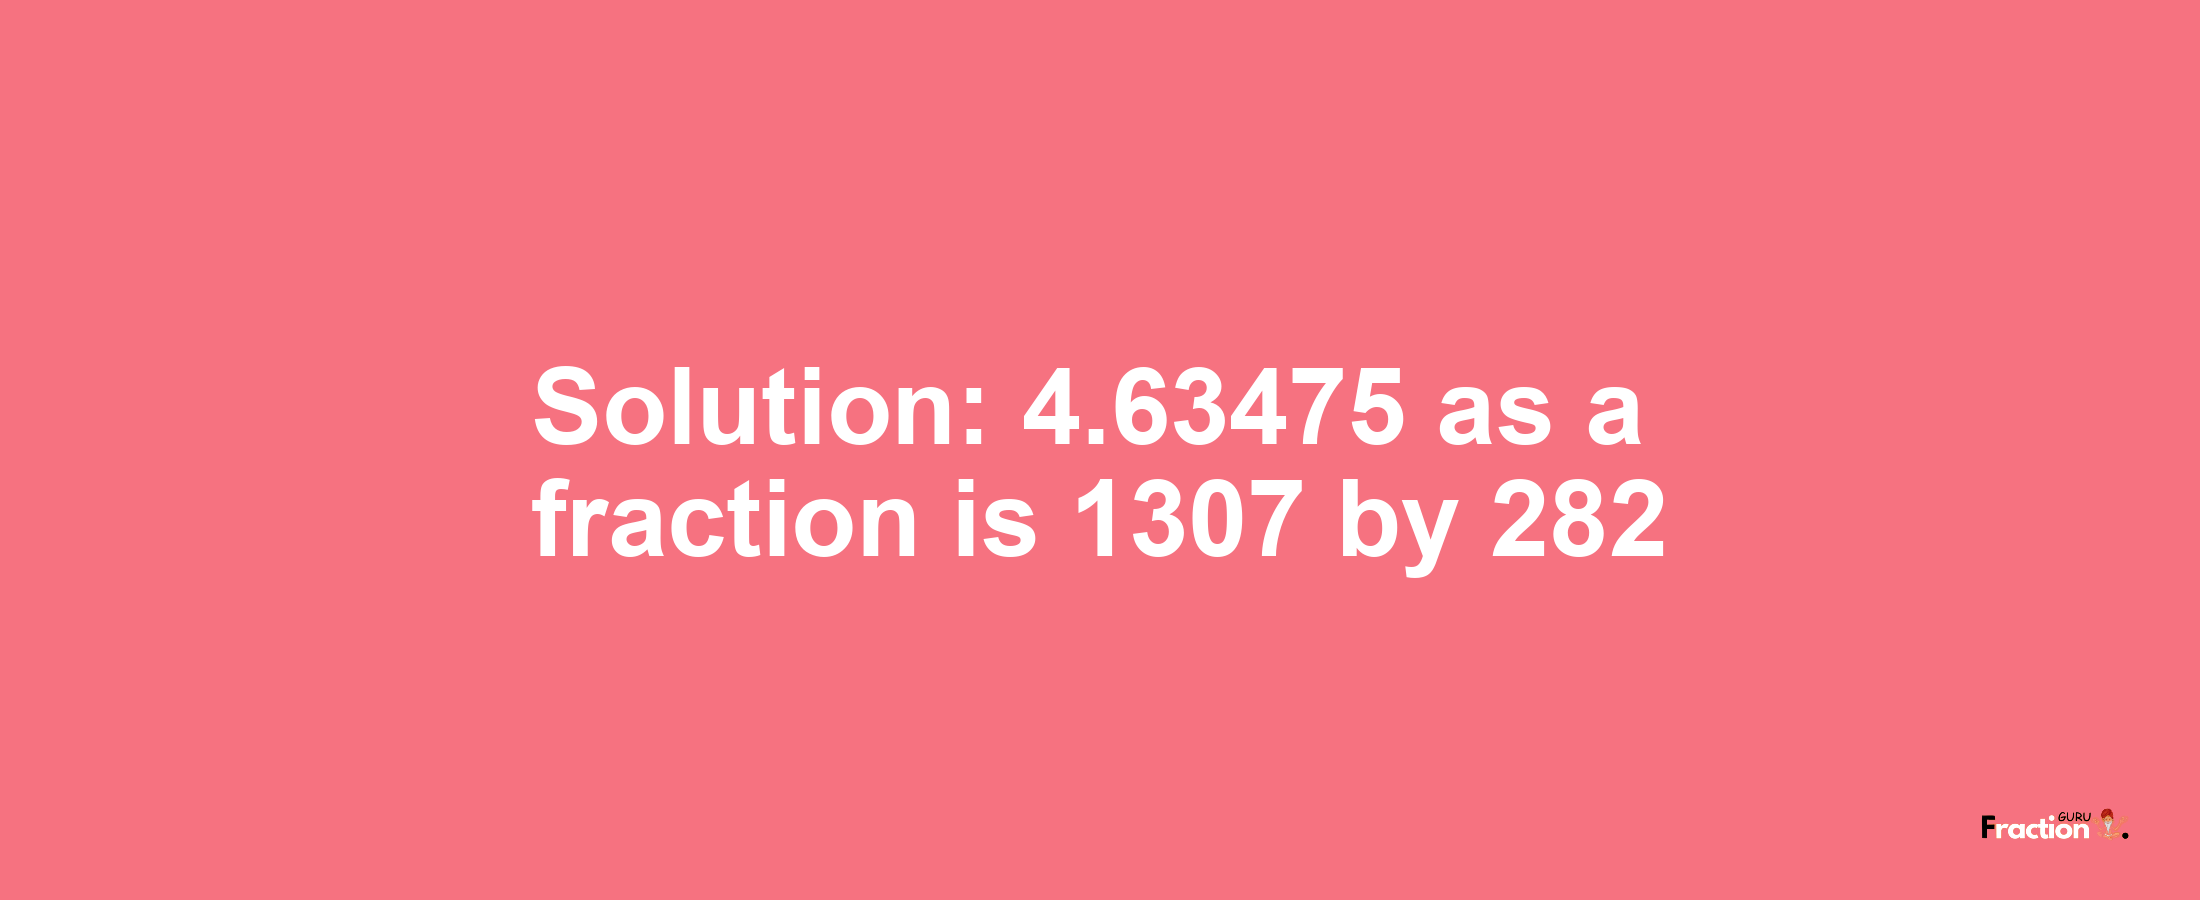 Solution:4.63475 as a fraction is 1307/282